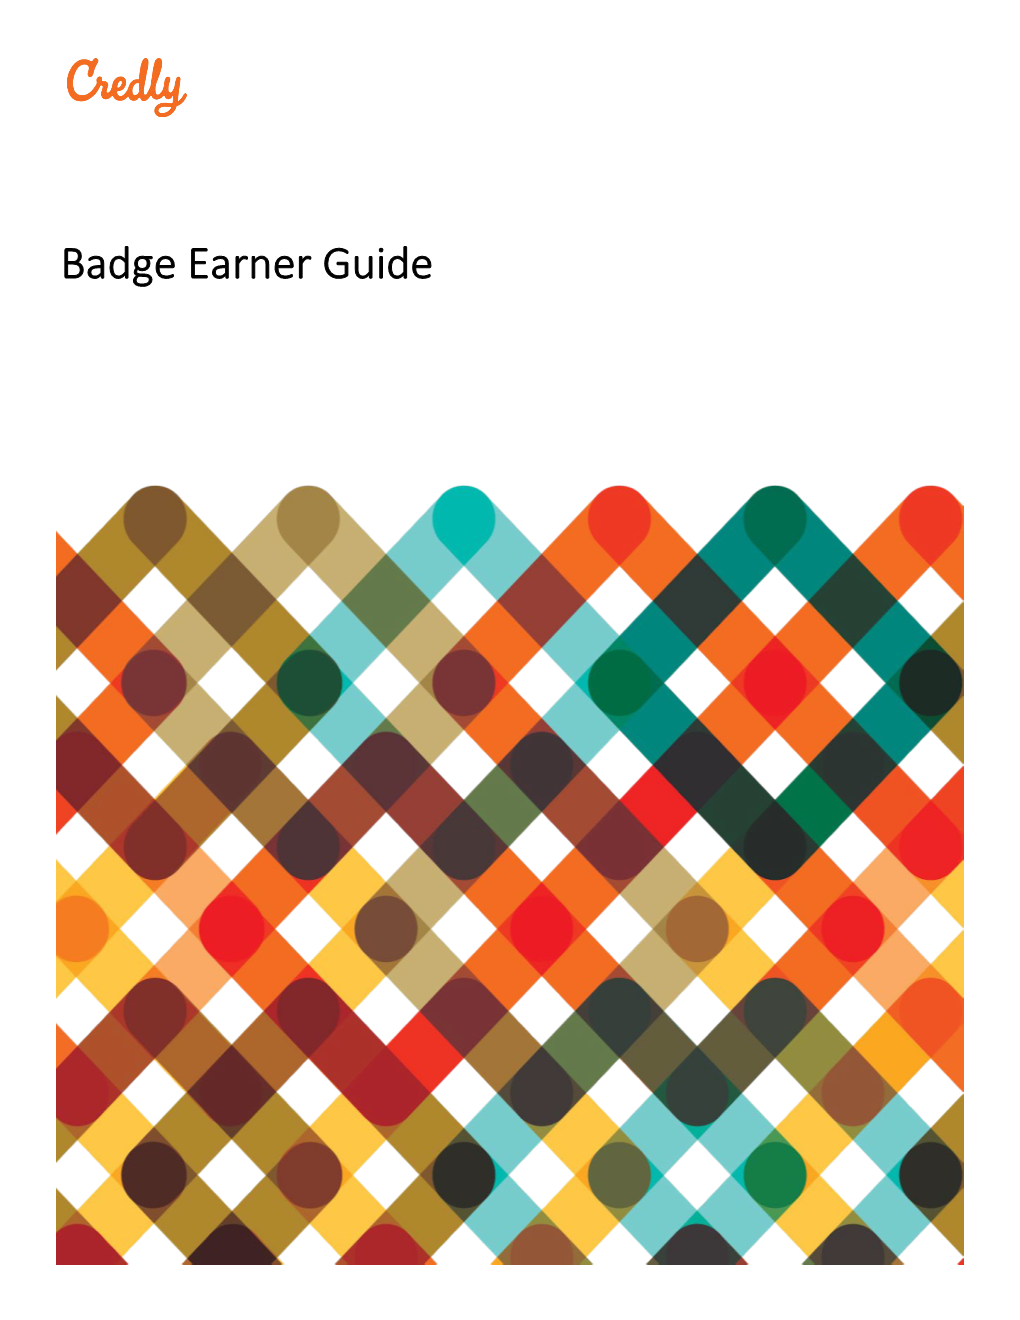 Credly Badge Earners Guide